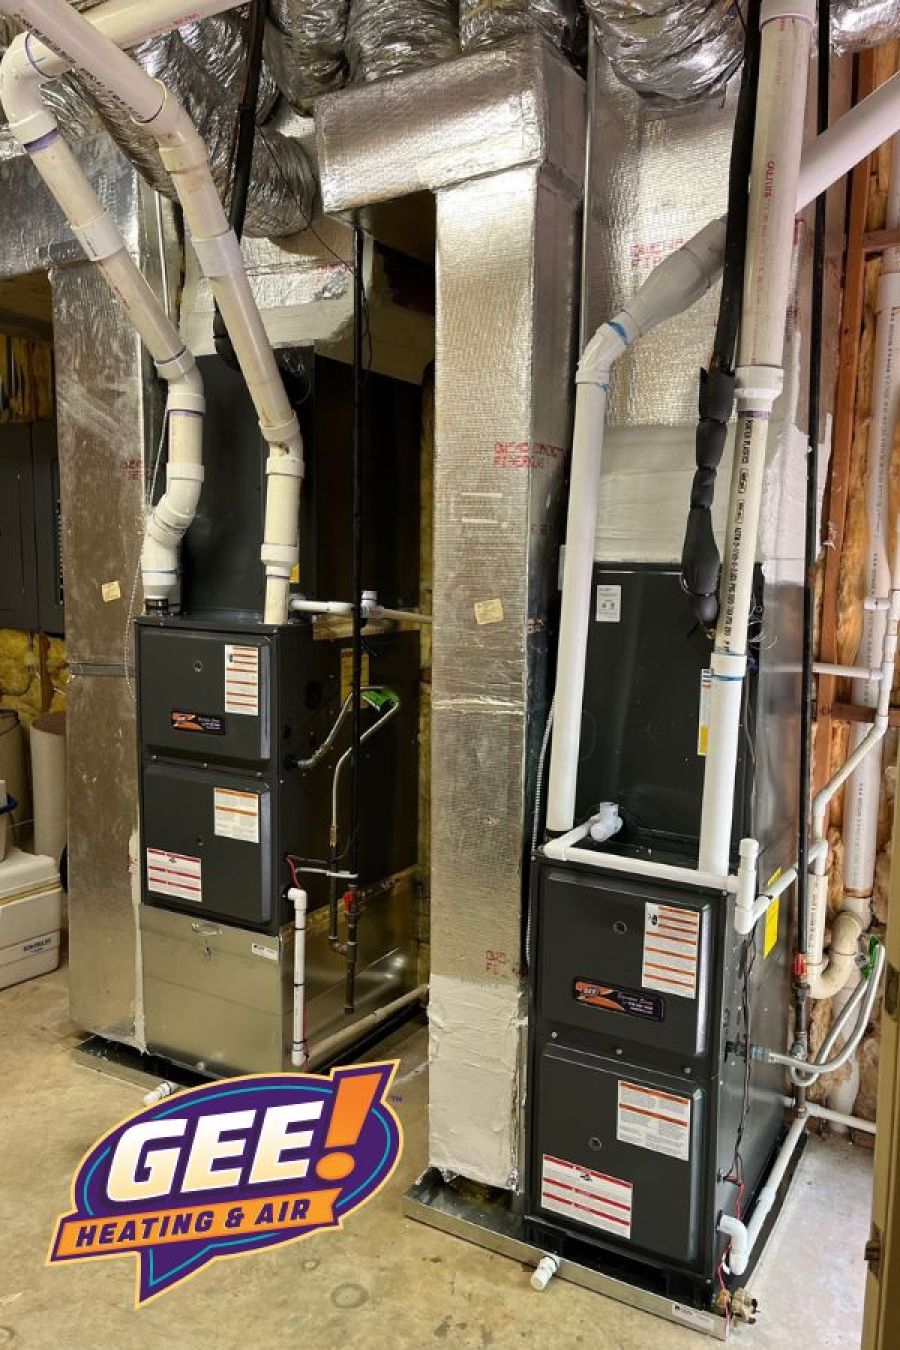 Gee! Heating & Air Furnace Replacement